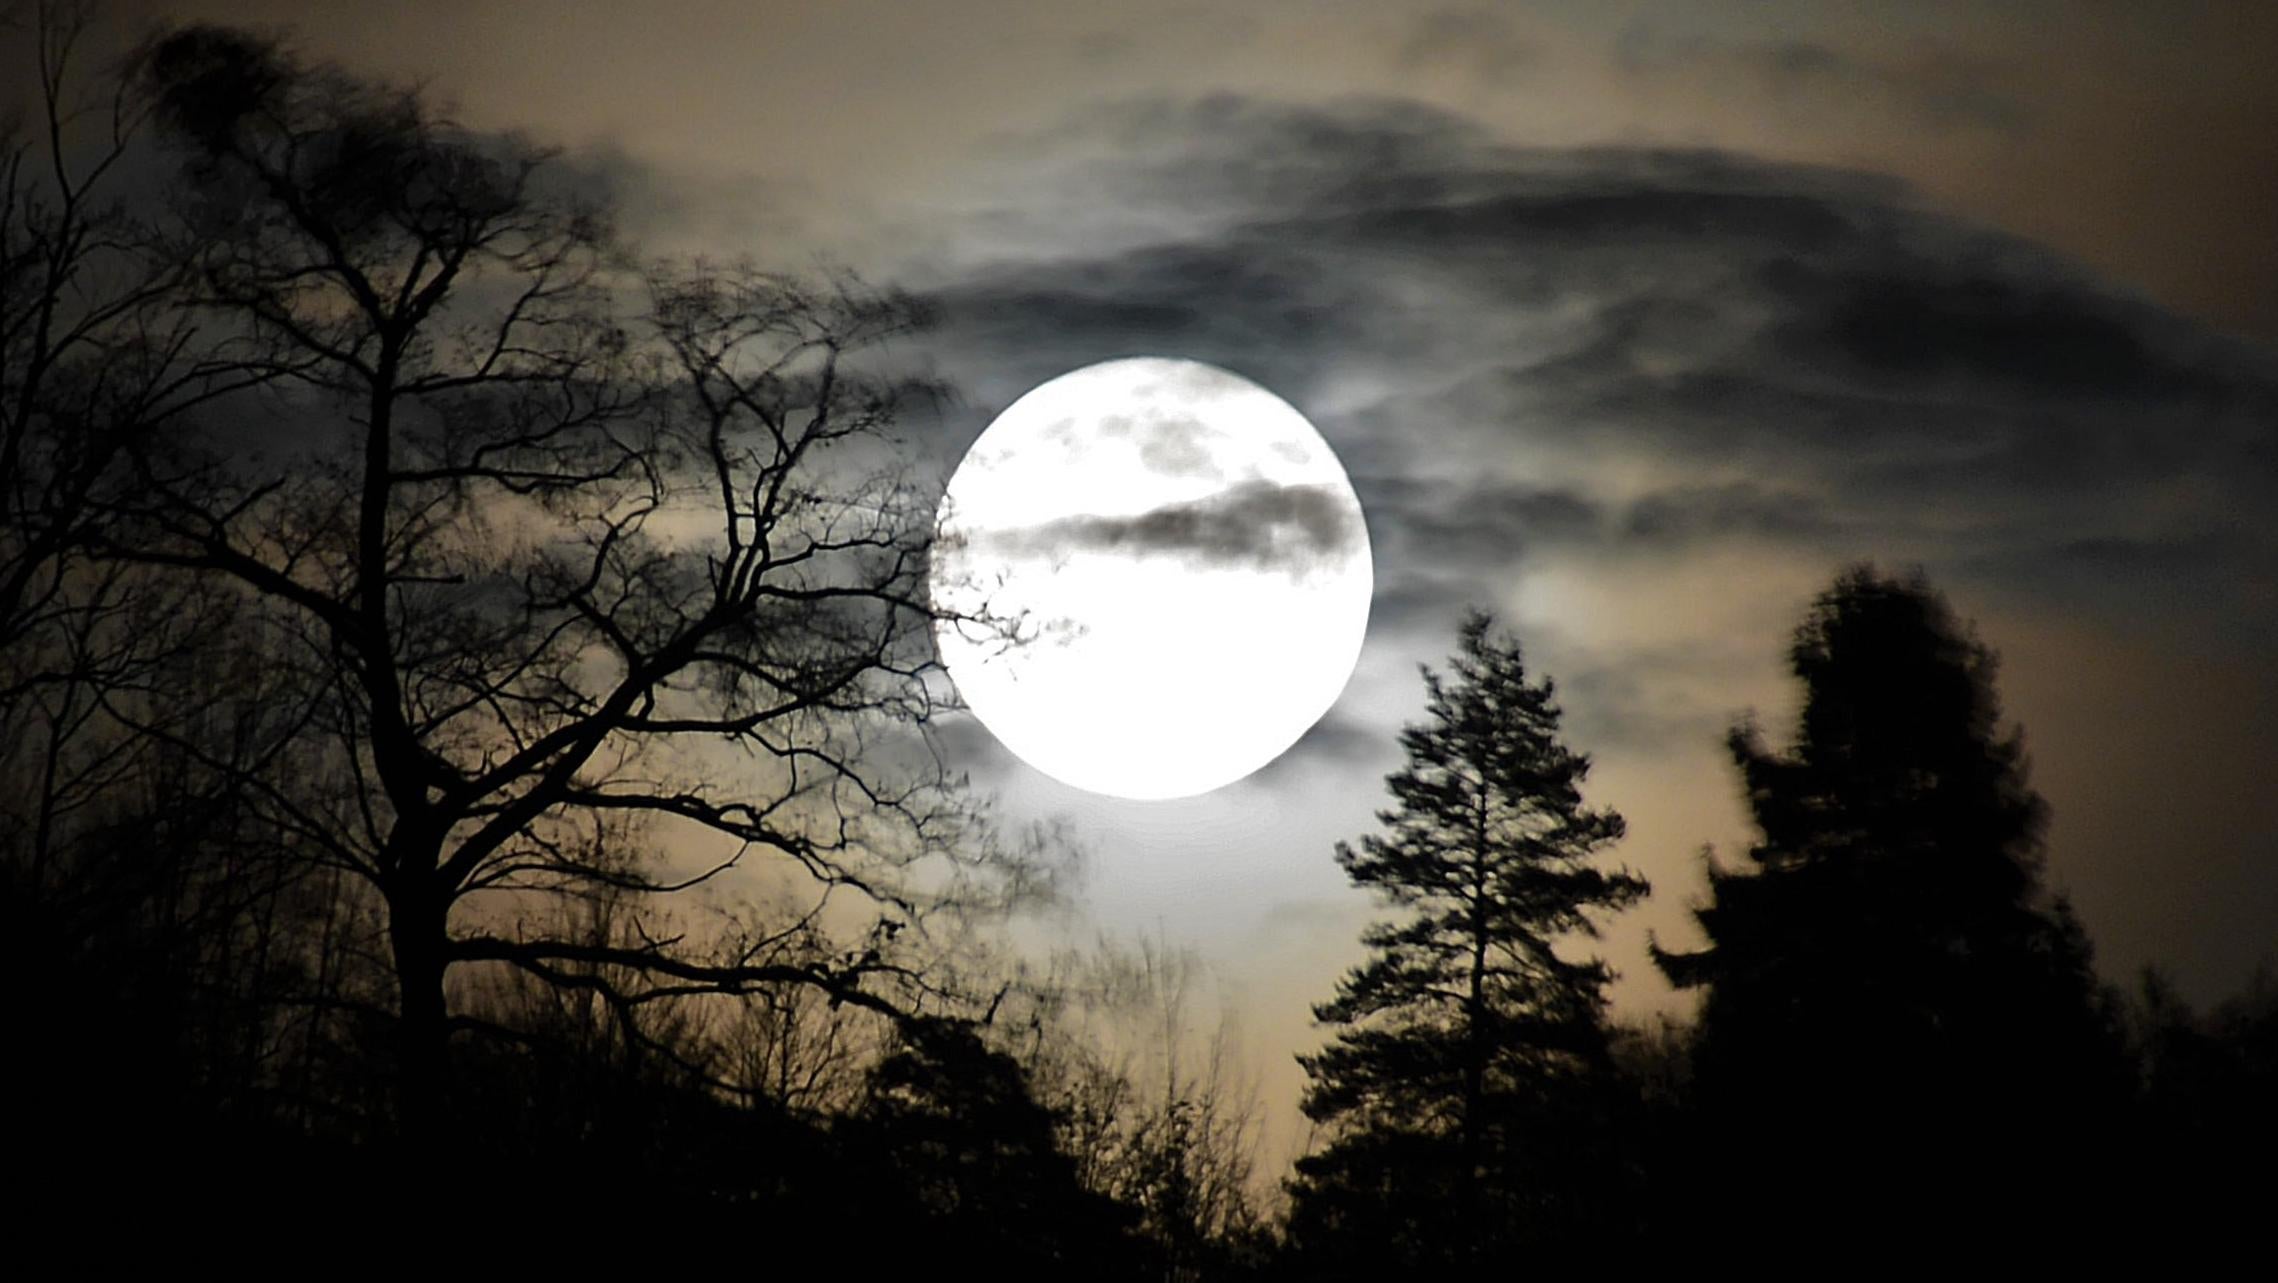 When to See the ‘Cold Moon’ in December